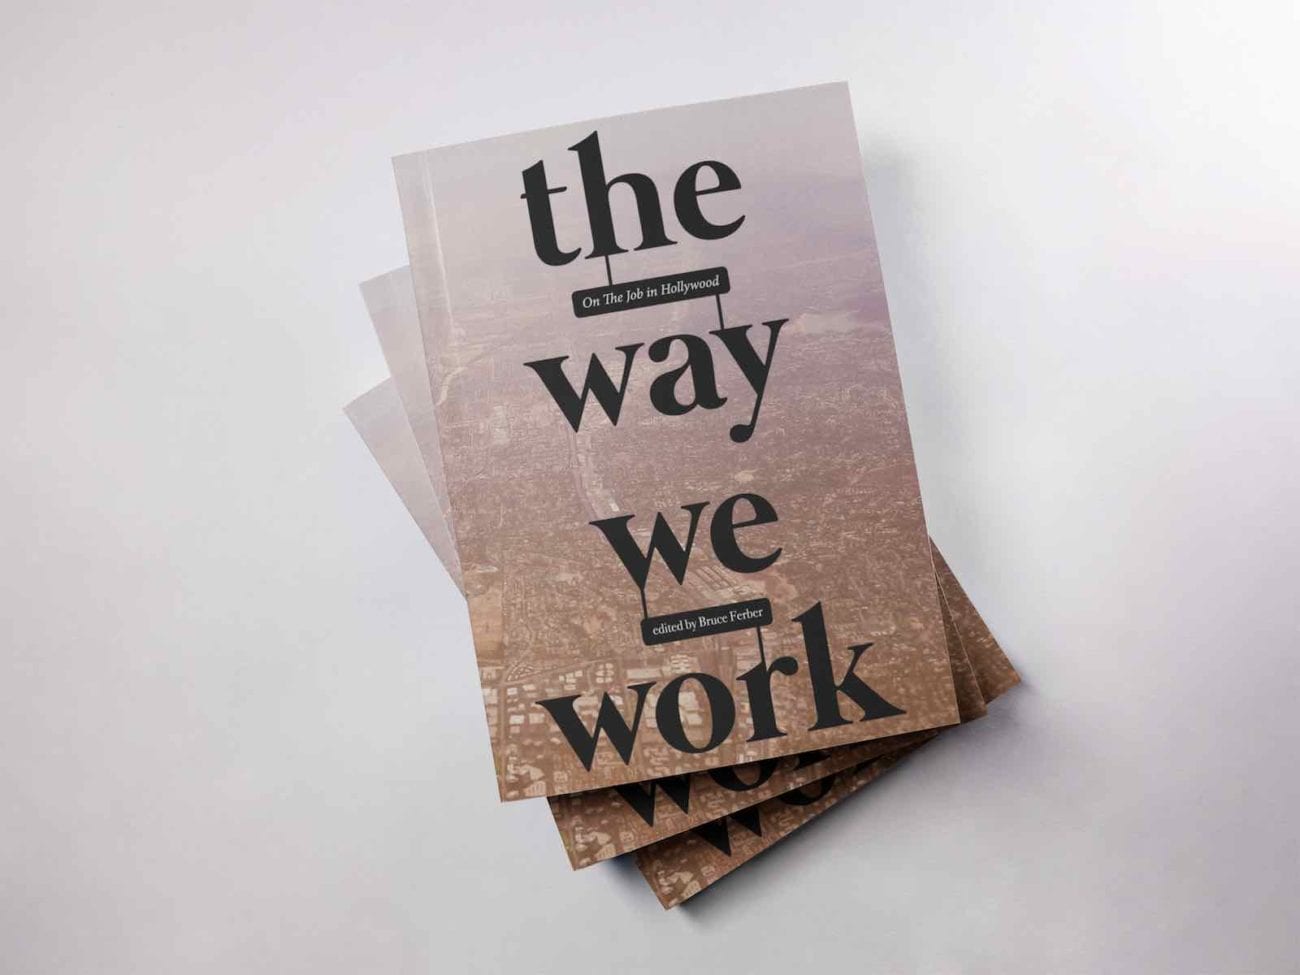 Author Bruce Ferber's 'The Way We Work' provides a window into the skill sets and the insanity that make movies & television tick.